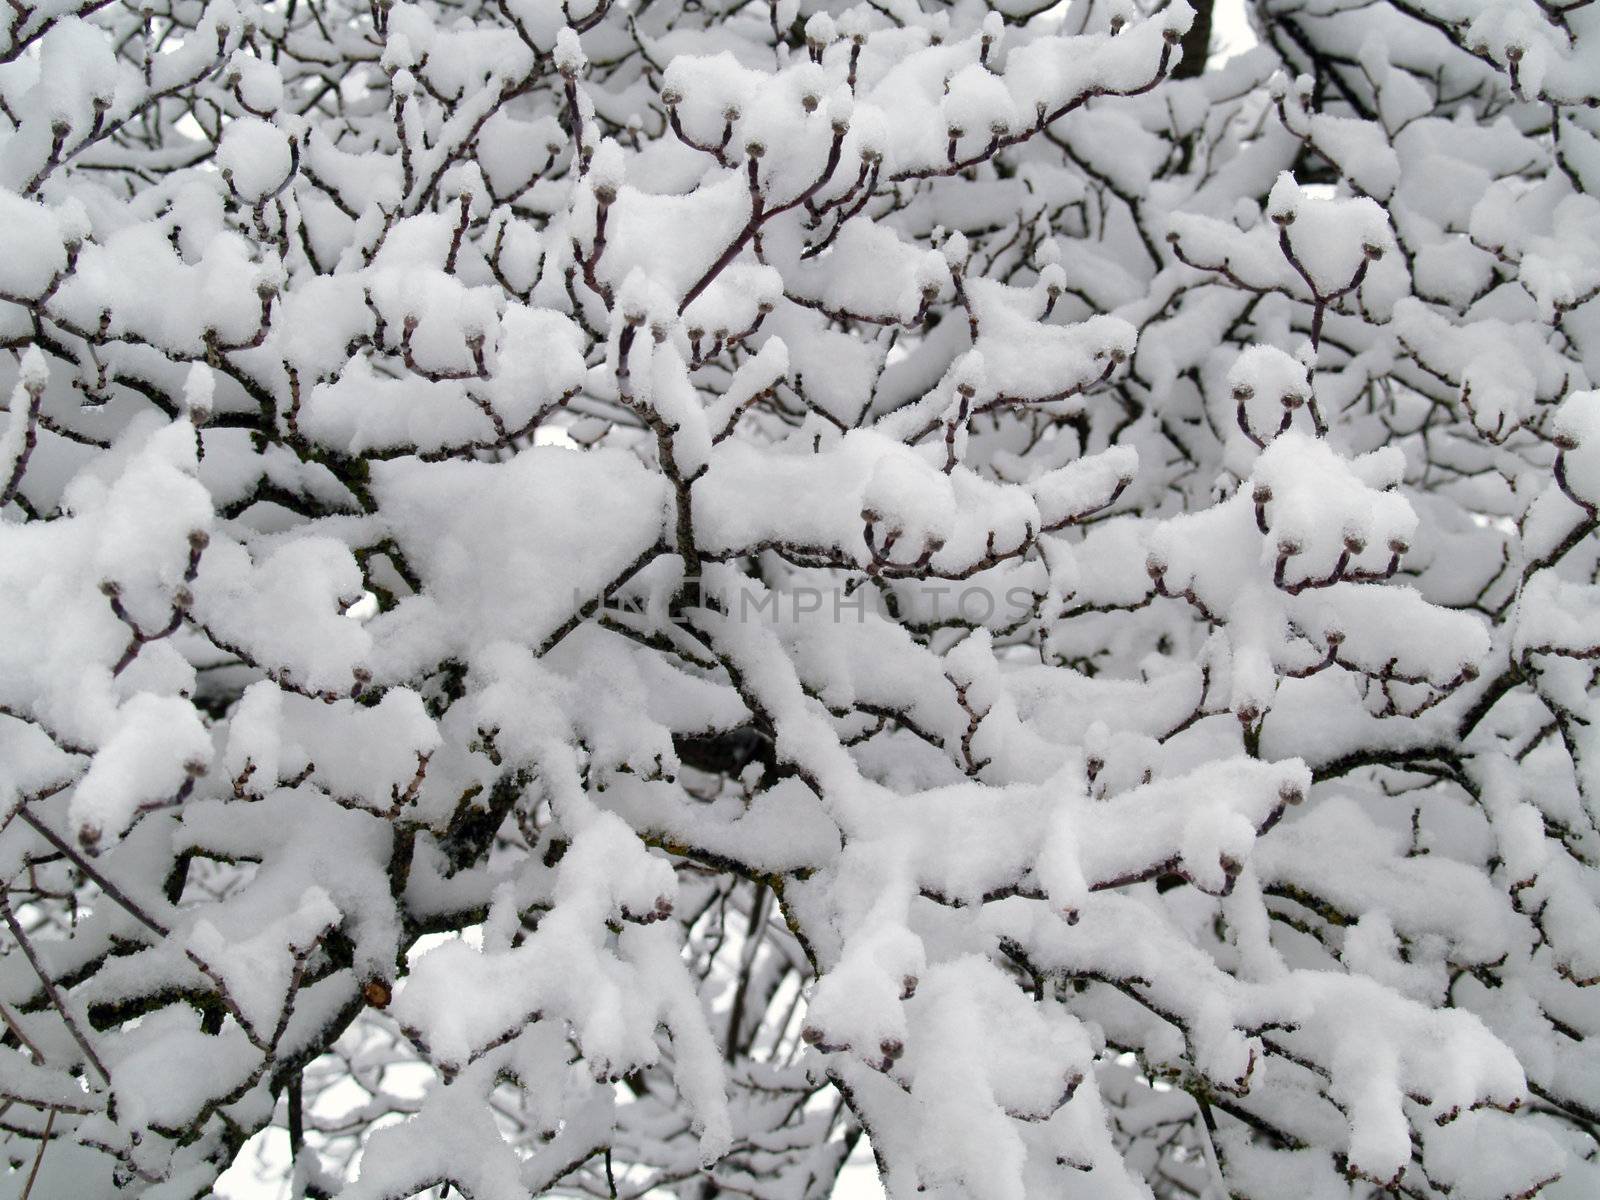 Snow Covered Branches on a Tree After a Snowfall